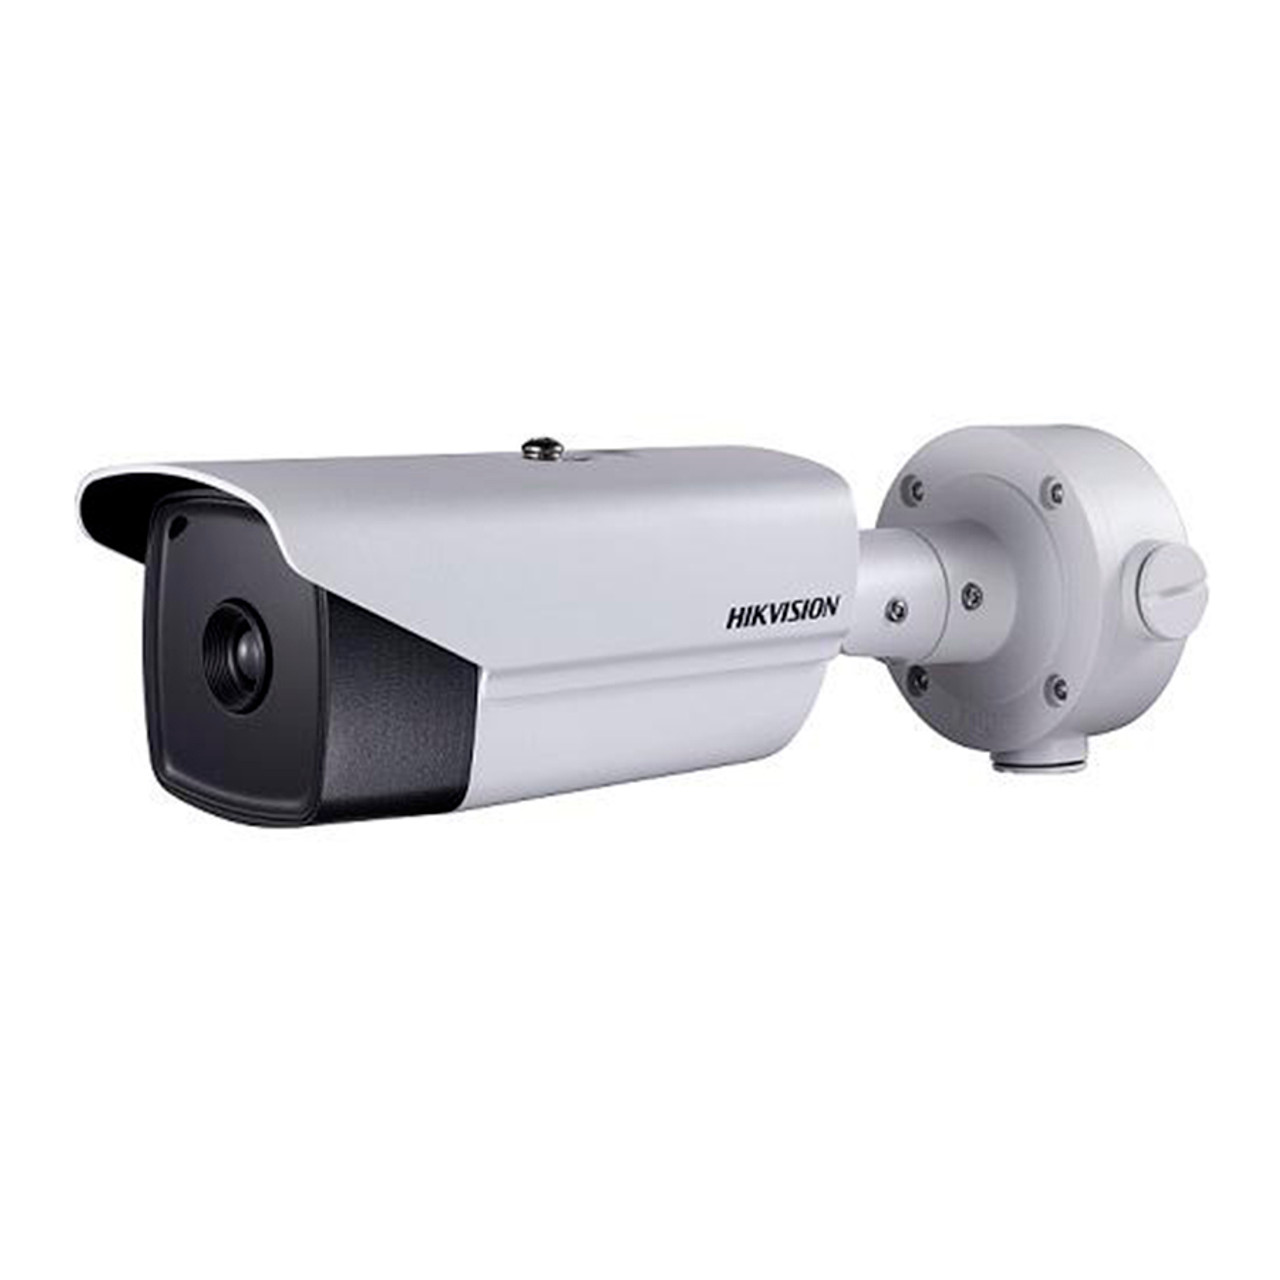 Hikvision DS-2TD2136-35 Outdoor Bullet IP Camera